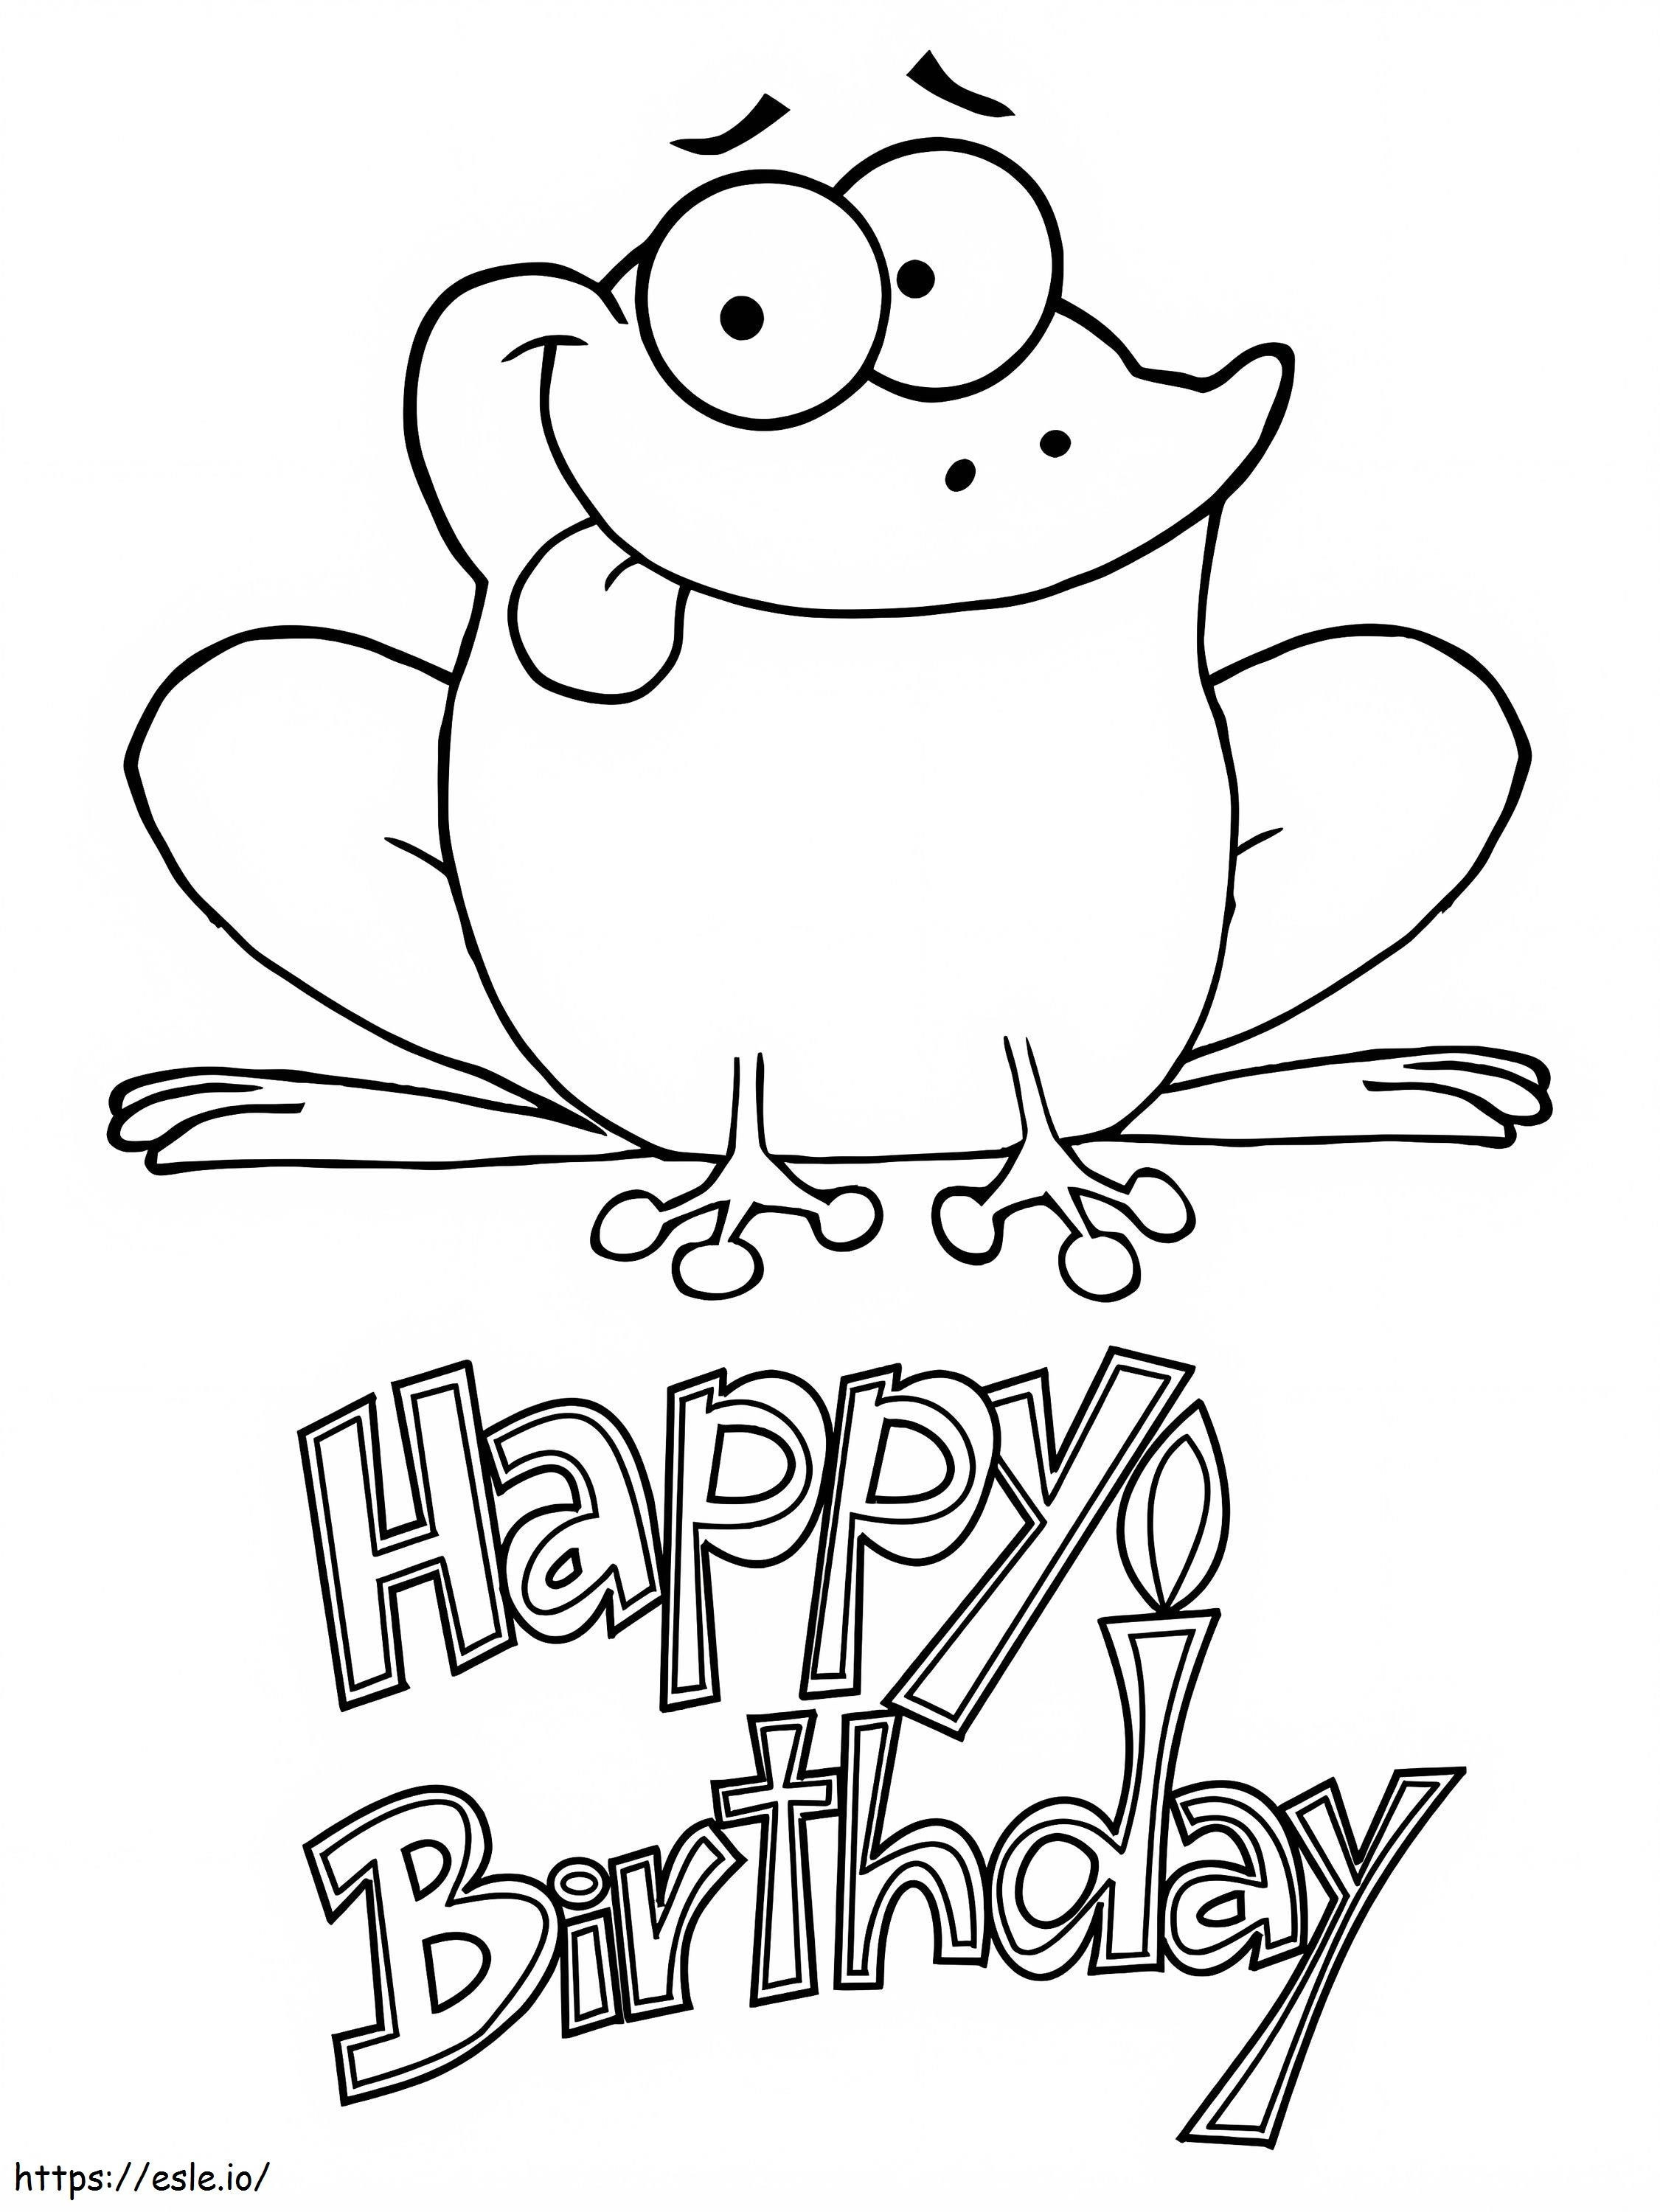 1586161731 Coloring Book Www Free Pages To Print Happy Birthday Printable coloring page